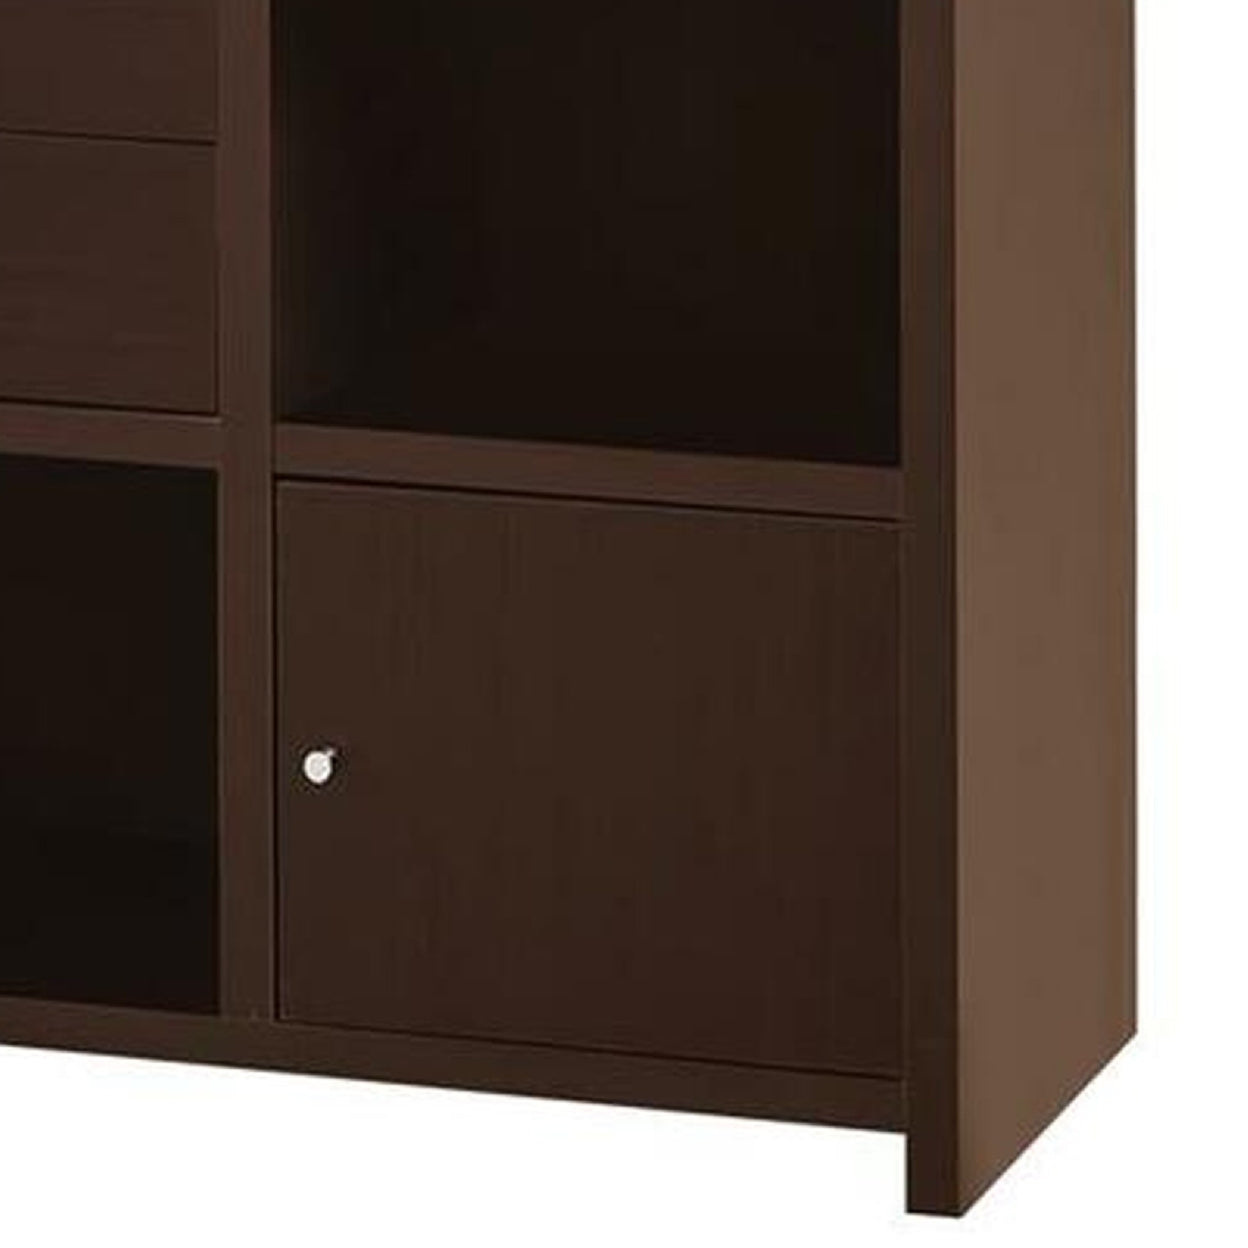 Spencer Bookcase with Cube Storage Compartments Cappuccino